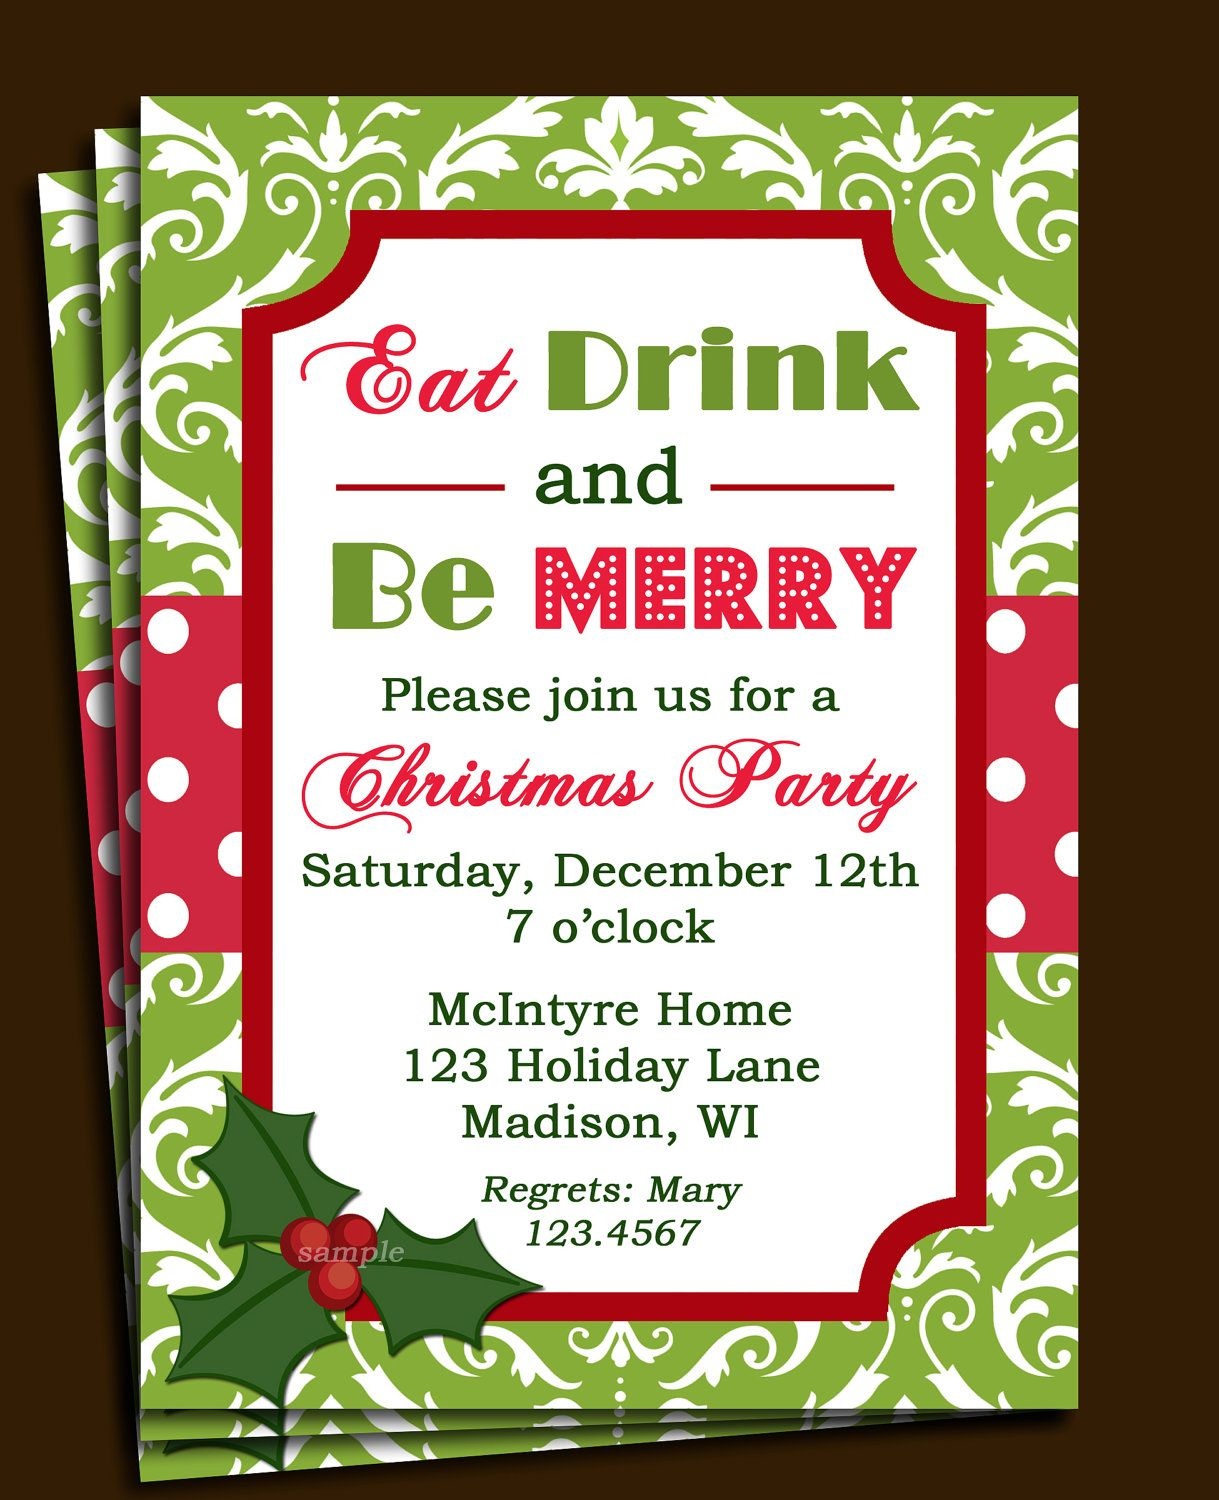 Free Printable Office Christmas Party Invitations | Party Stuff - Holiday Invitations Free Printable